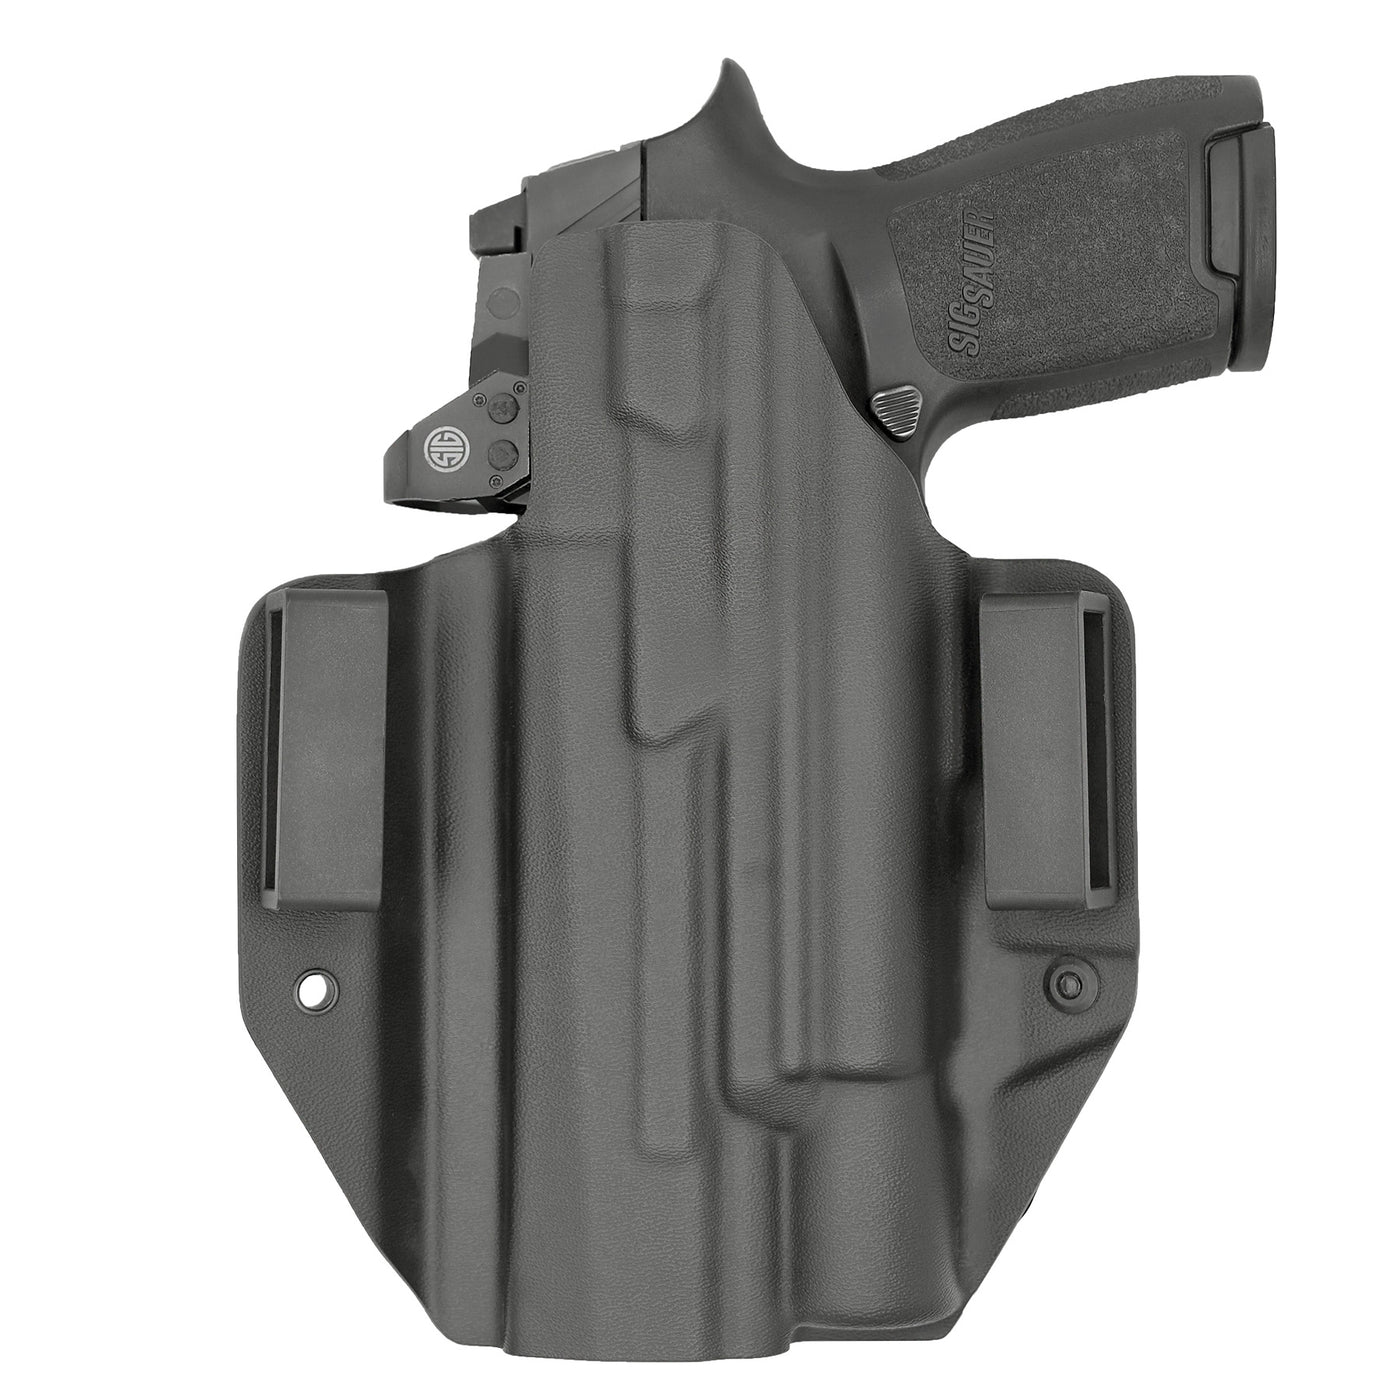 C&G Holsters custom OWB Tactical IWI Masada Surefire X300 in holstered position back view